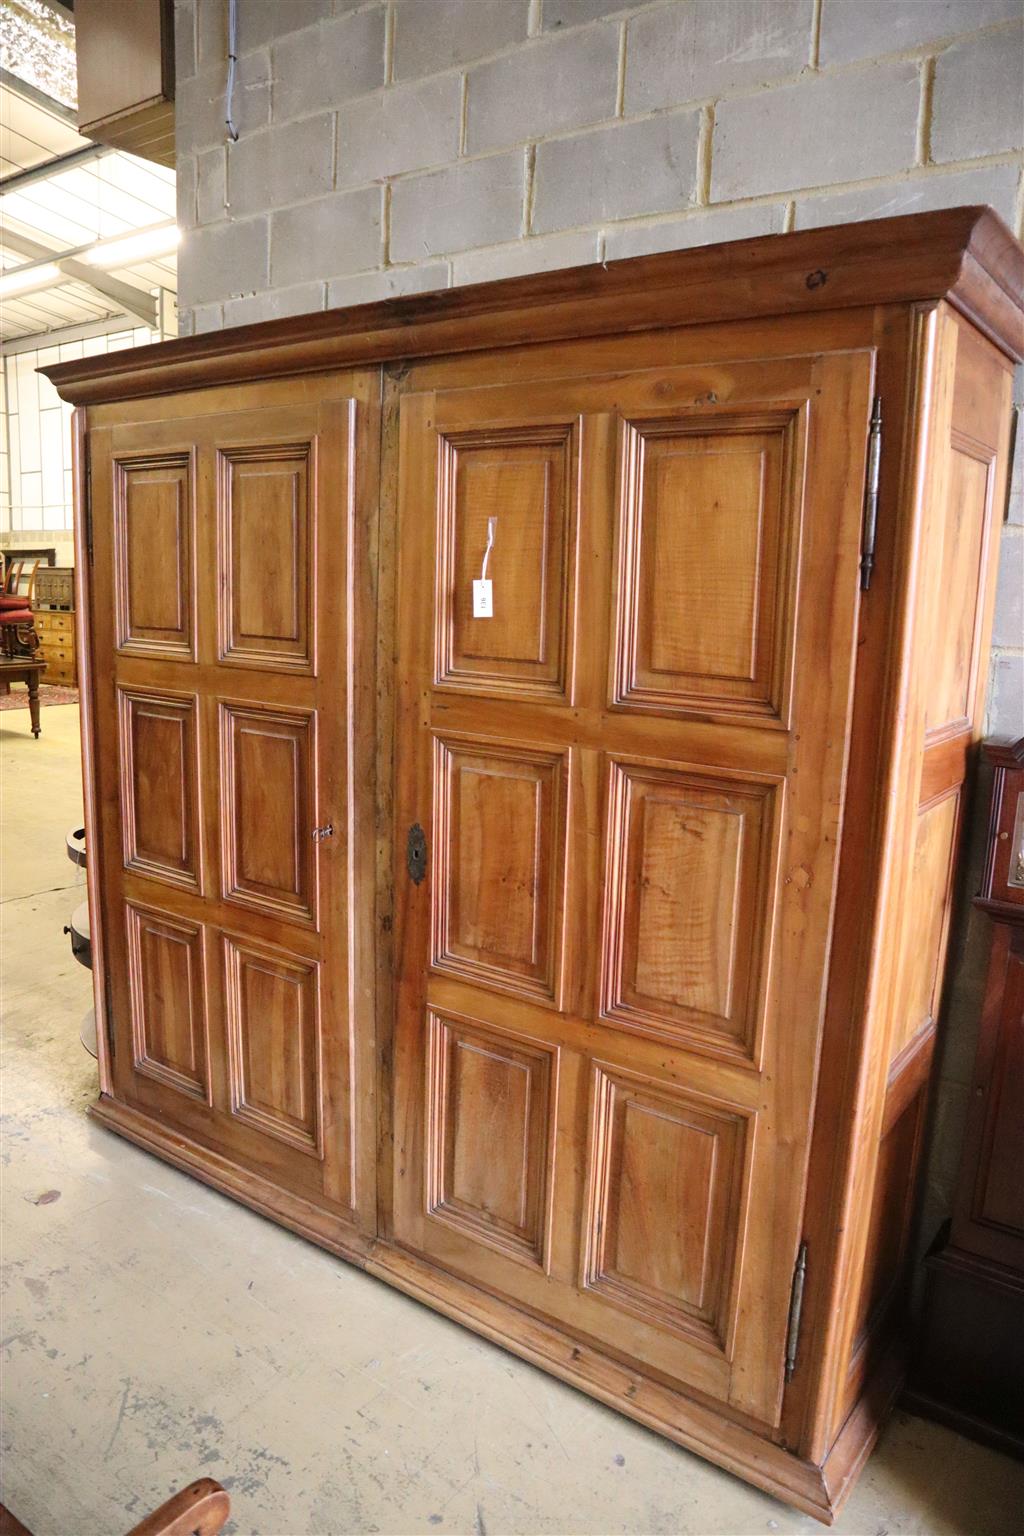 A 19th century French walnut two door panelled armoire, width 224cm, depth 58cm, height 222cm